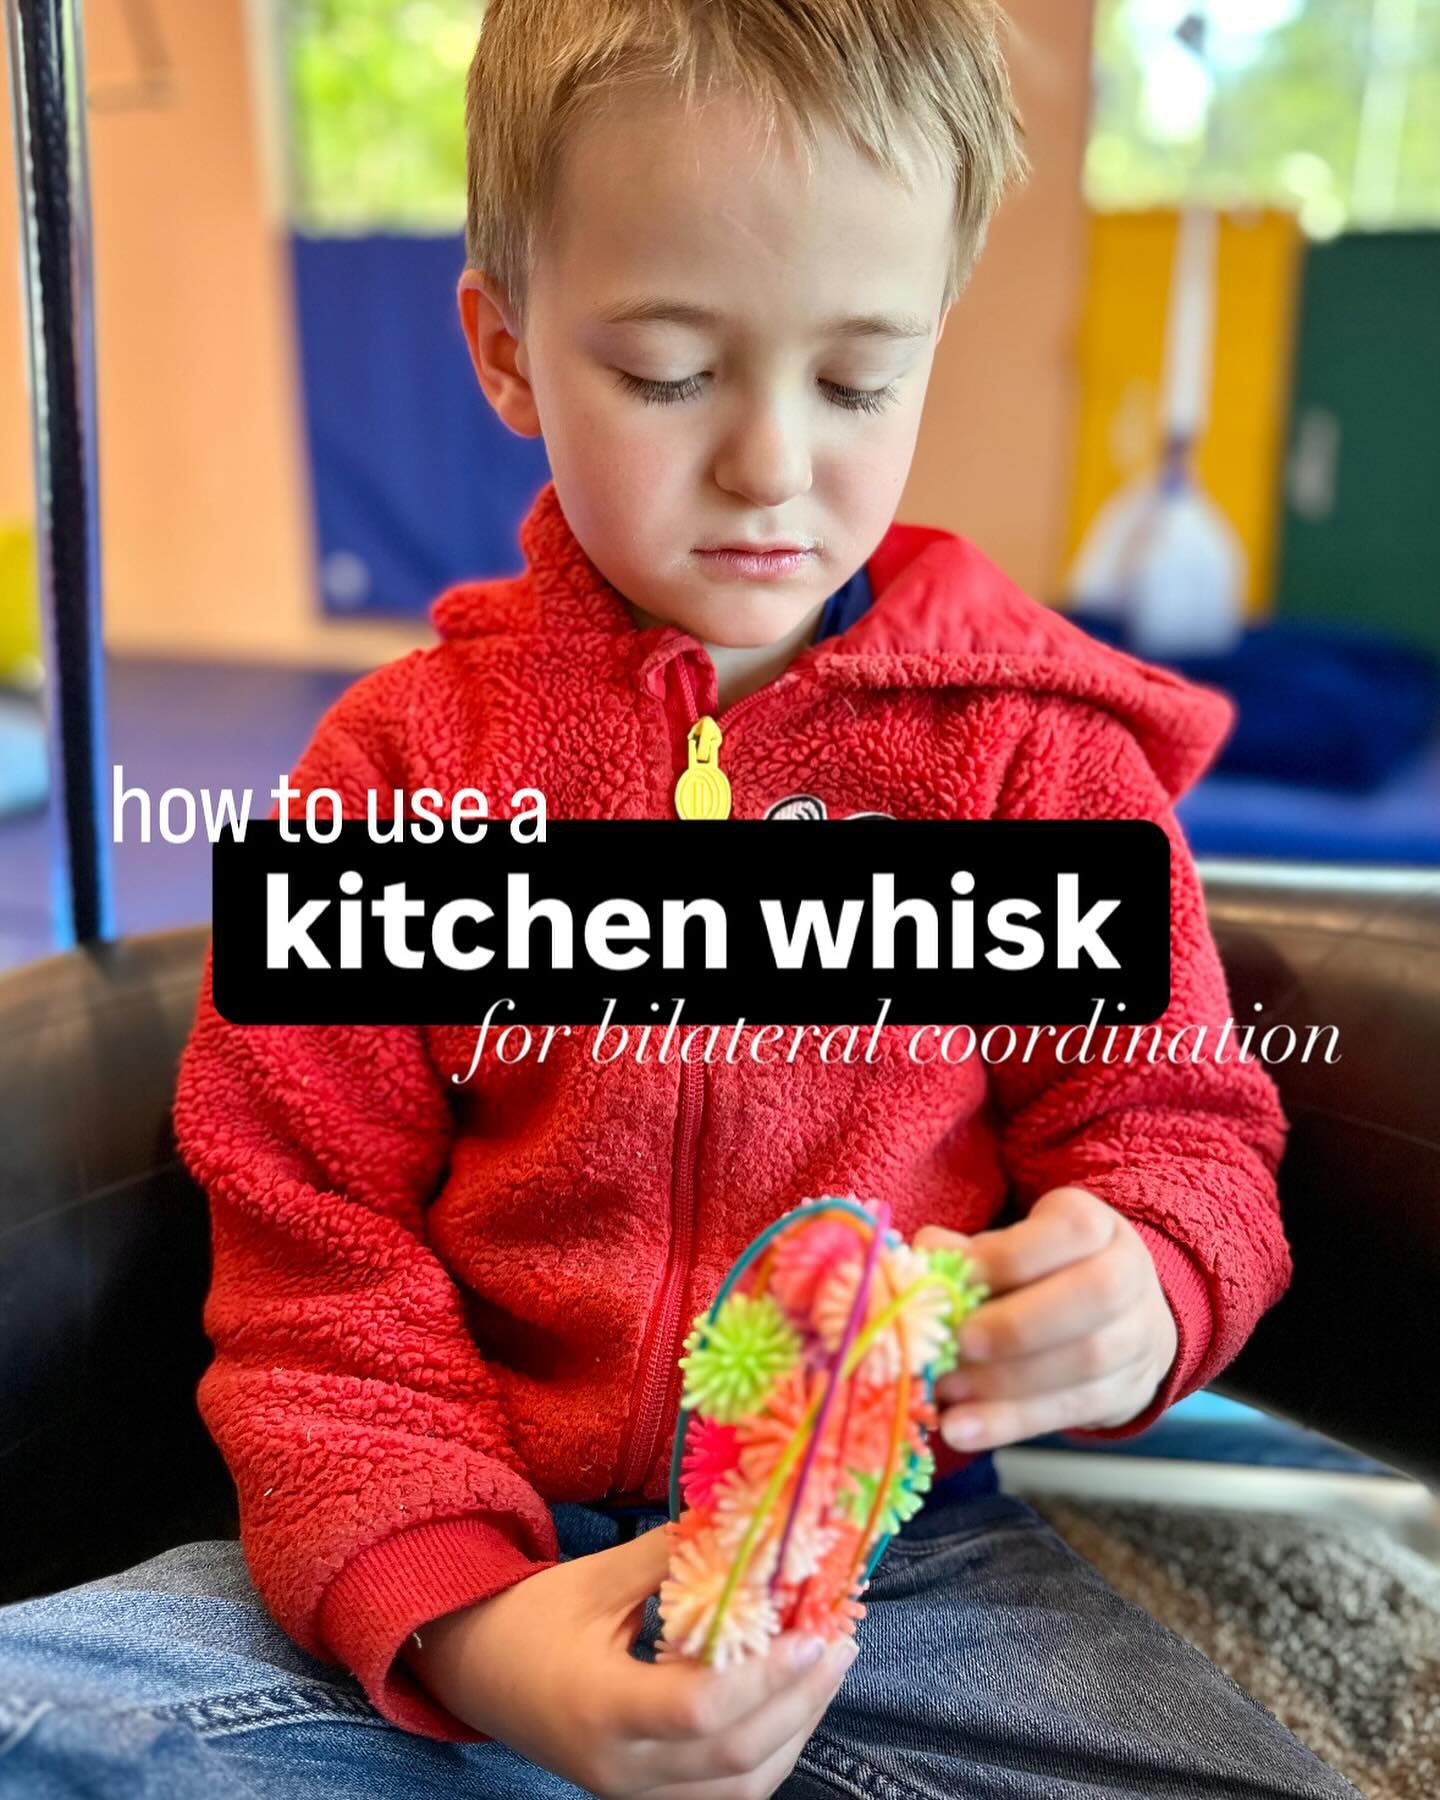 If you have a kitchen whisk and any small items, you can work on bilateral coordination at home! 

What do we need bilateral coordination for?

🔴 To hold our paper while we cut
🟠 To hold the bowl while we mix food
🟡 To fold our laundry 
🟢 To hold